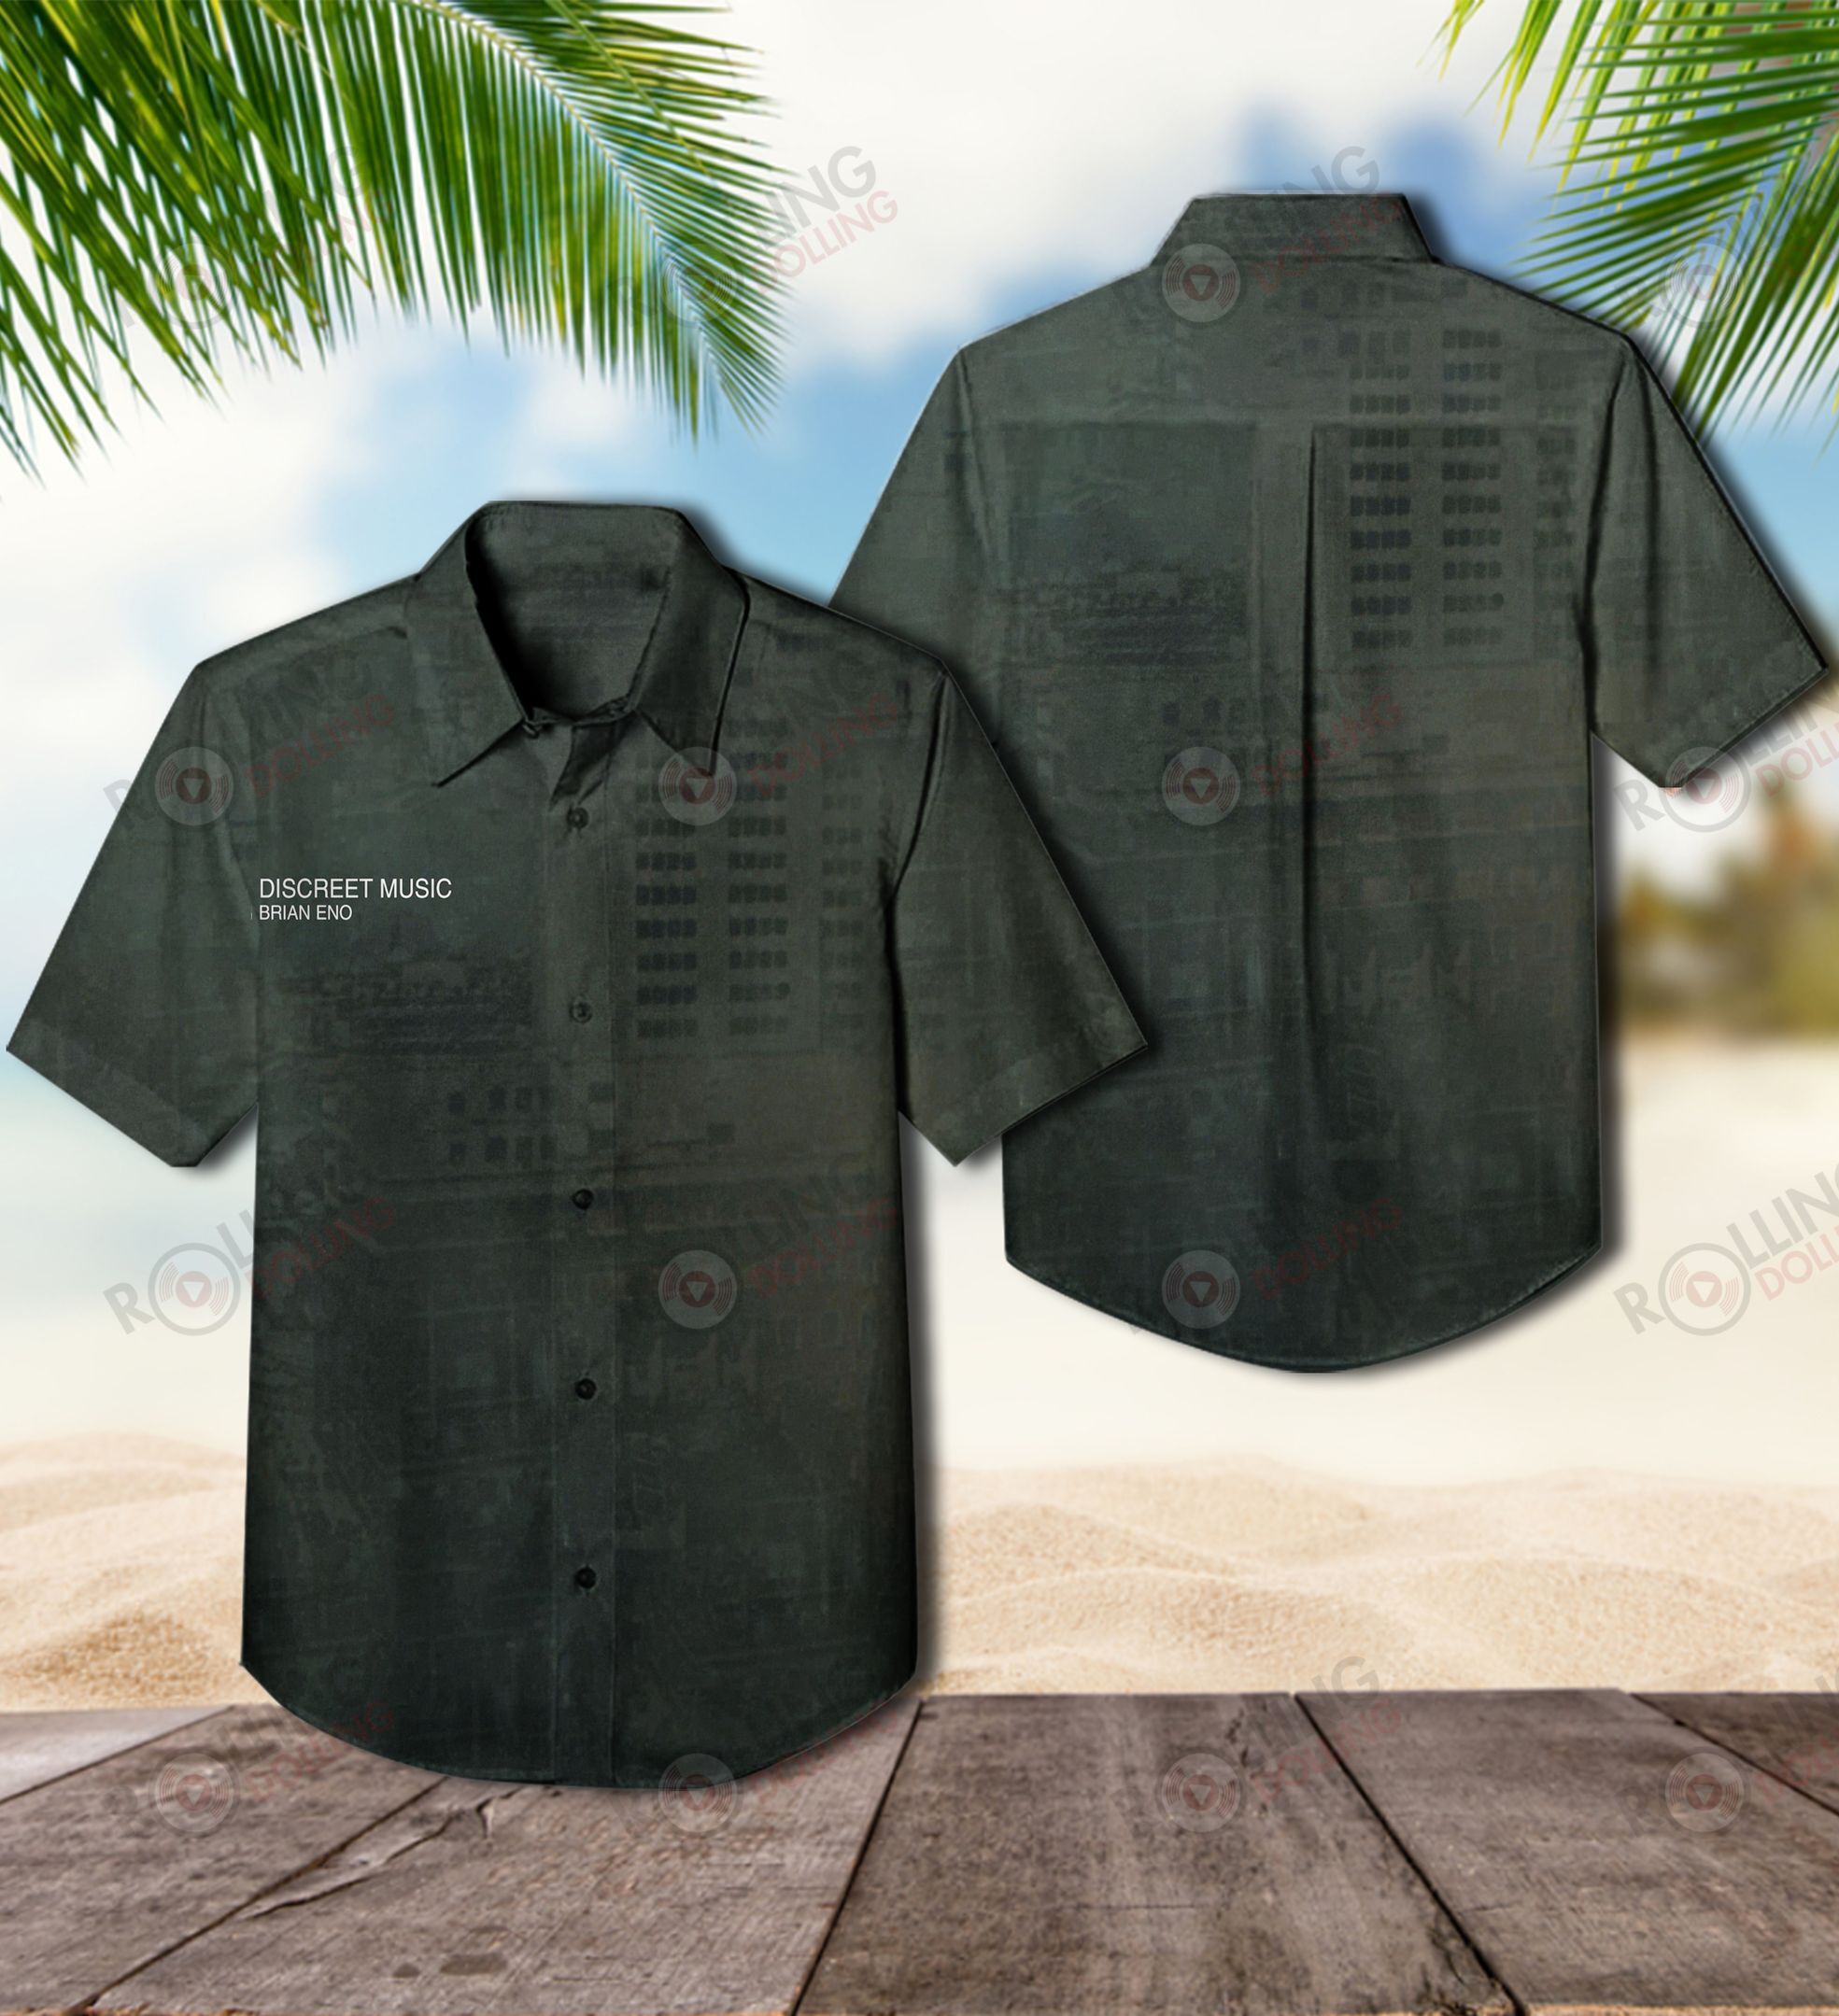 This would make a great gift for any fan who loves Hawaiian Shirt as well as Rock band 170